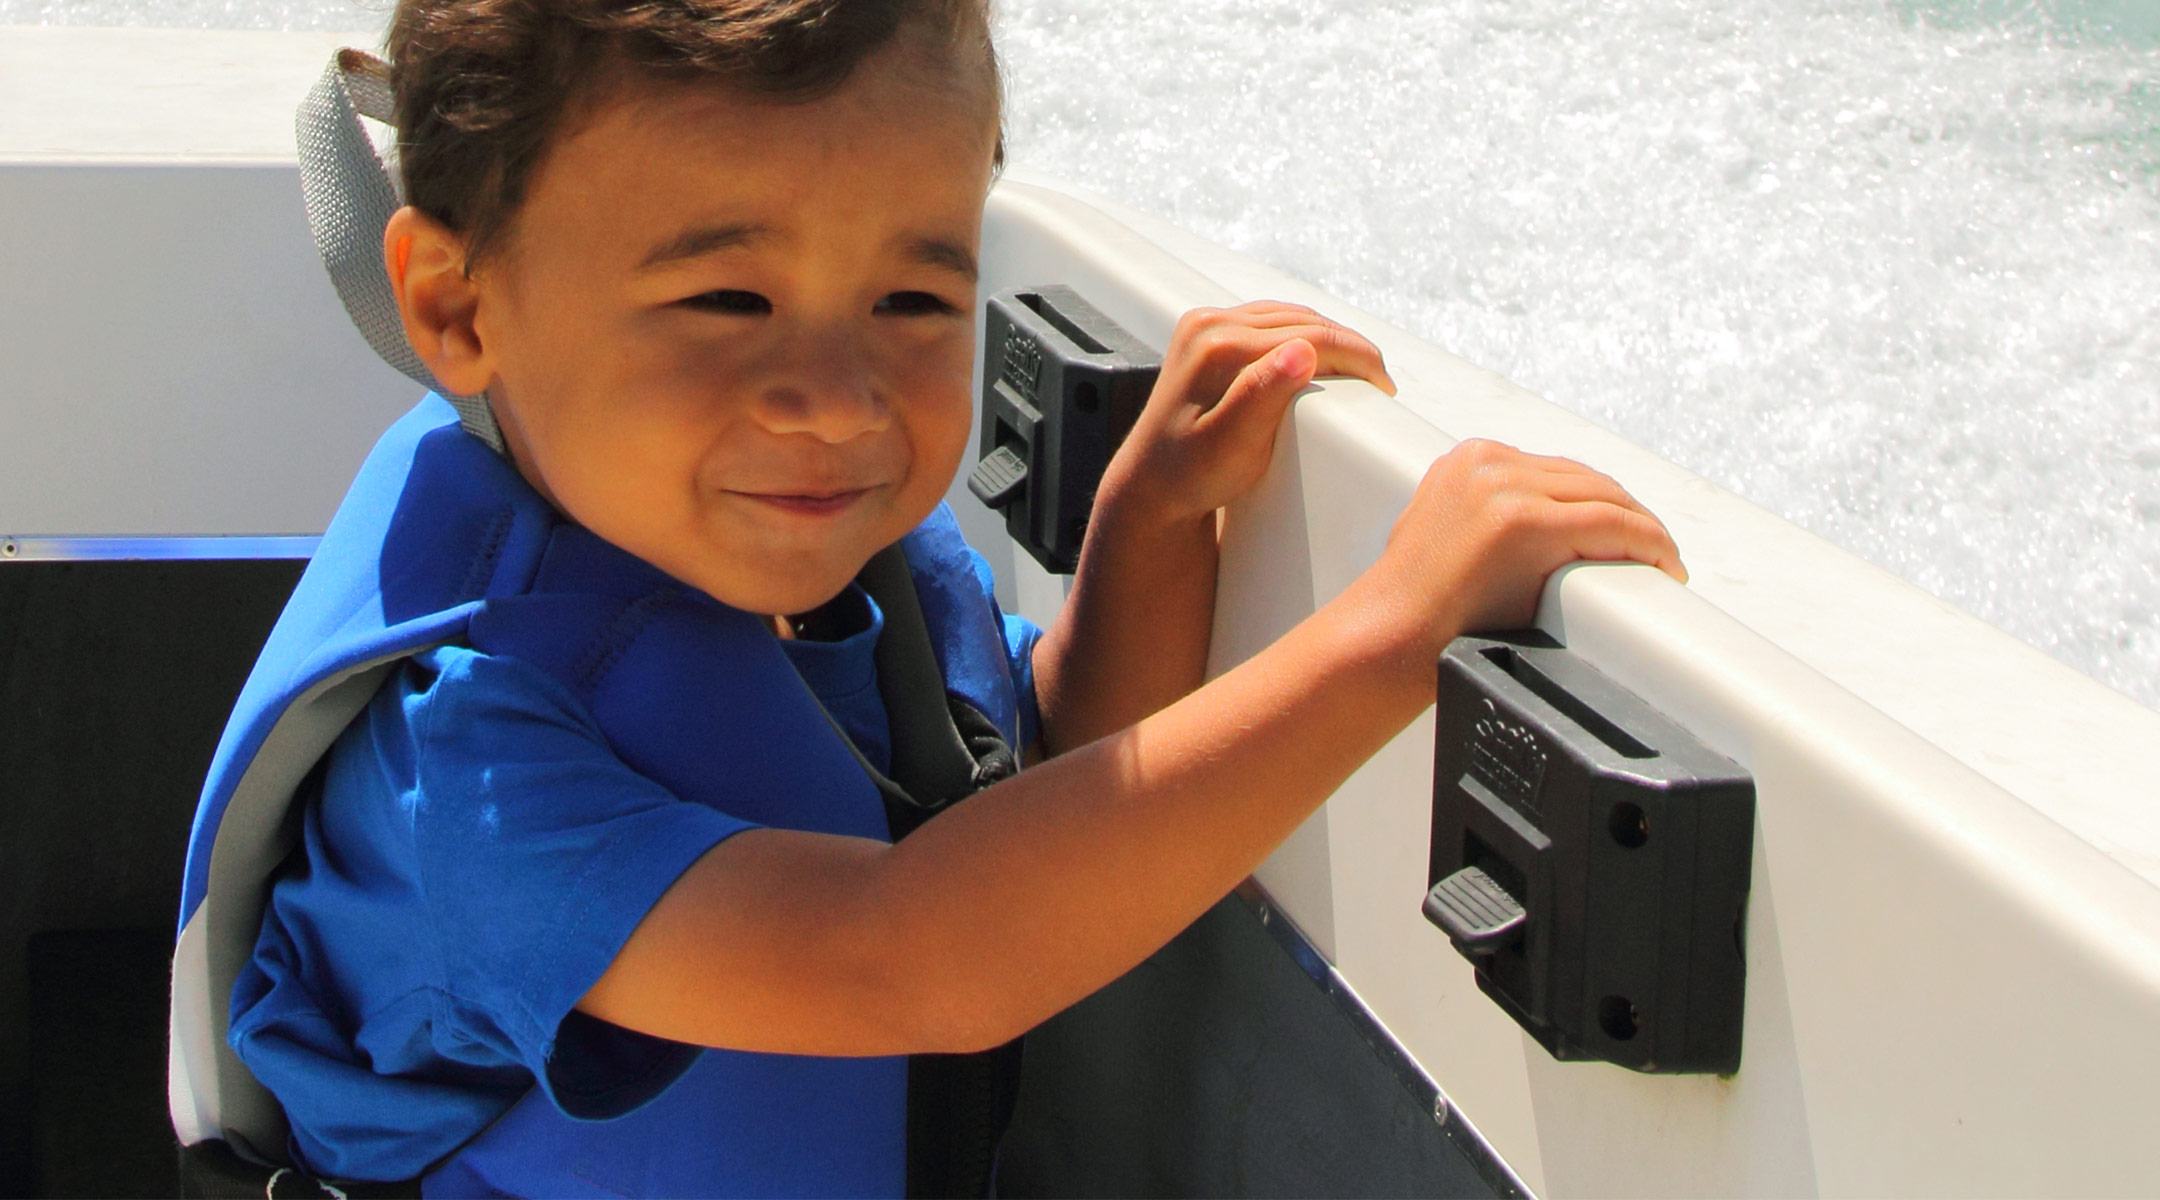 toddler boating on the open water and wearing a life vest